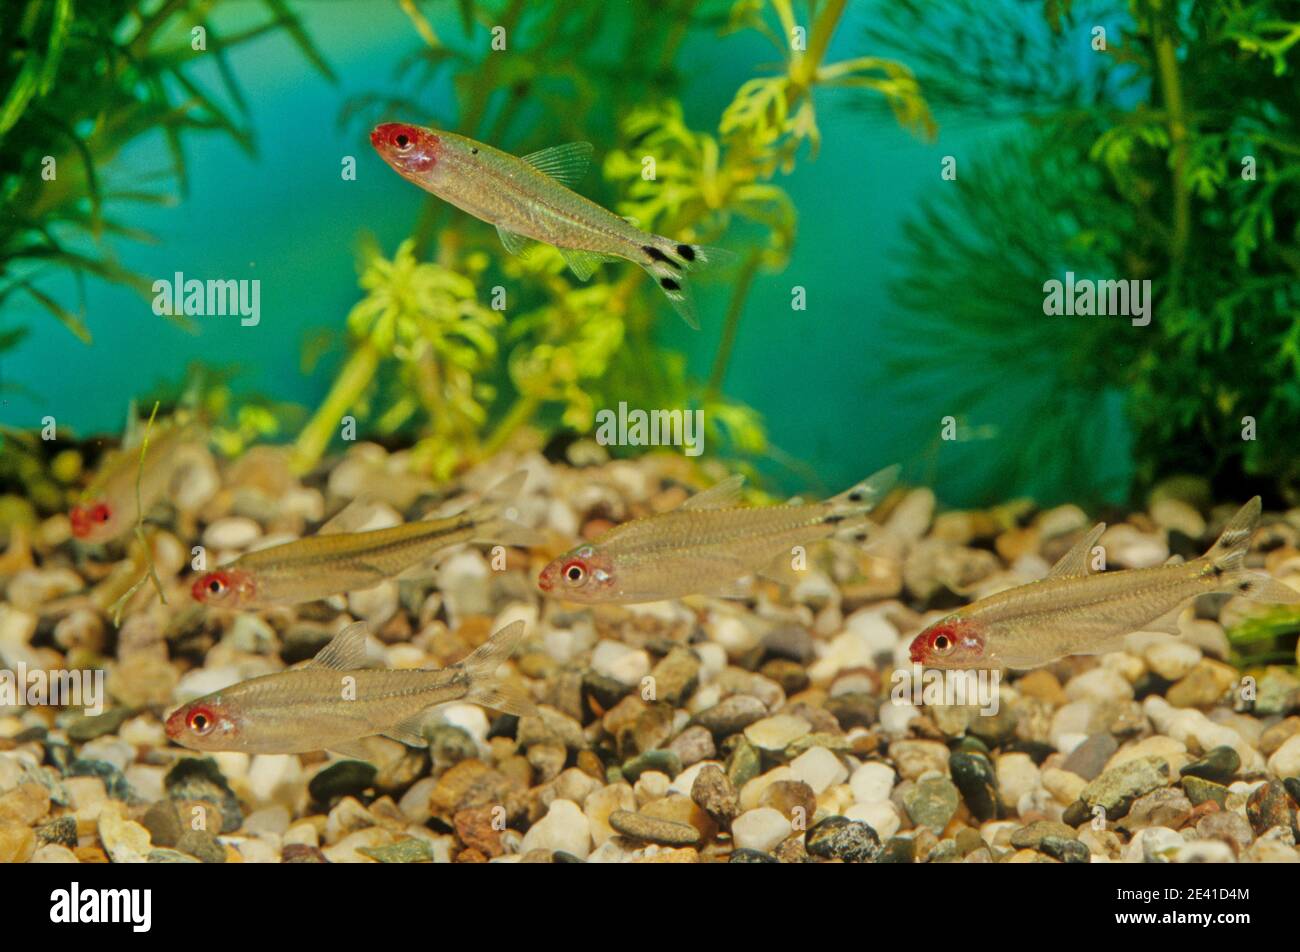 Hemigrammus bleheri is a species of characin found in Amazon Basin in Brazil and Peru. Stock Photo